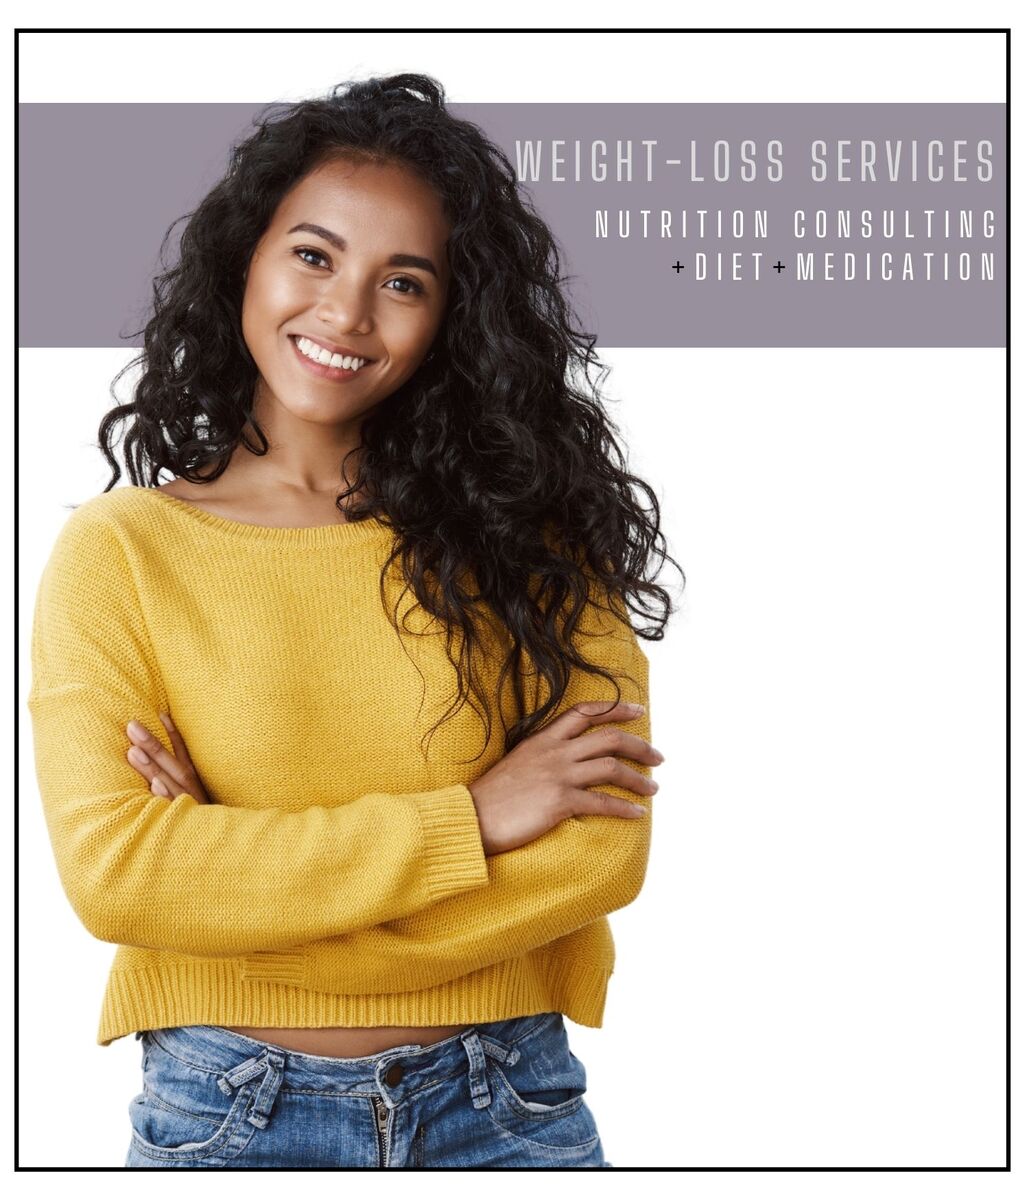 Woman smiling wearing a yellow sweater and looking slimmed after weight loss services.